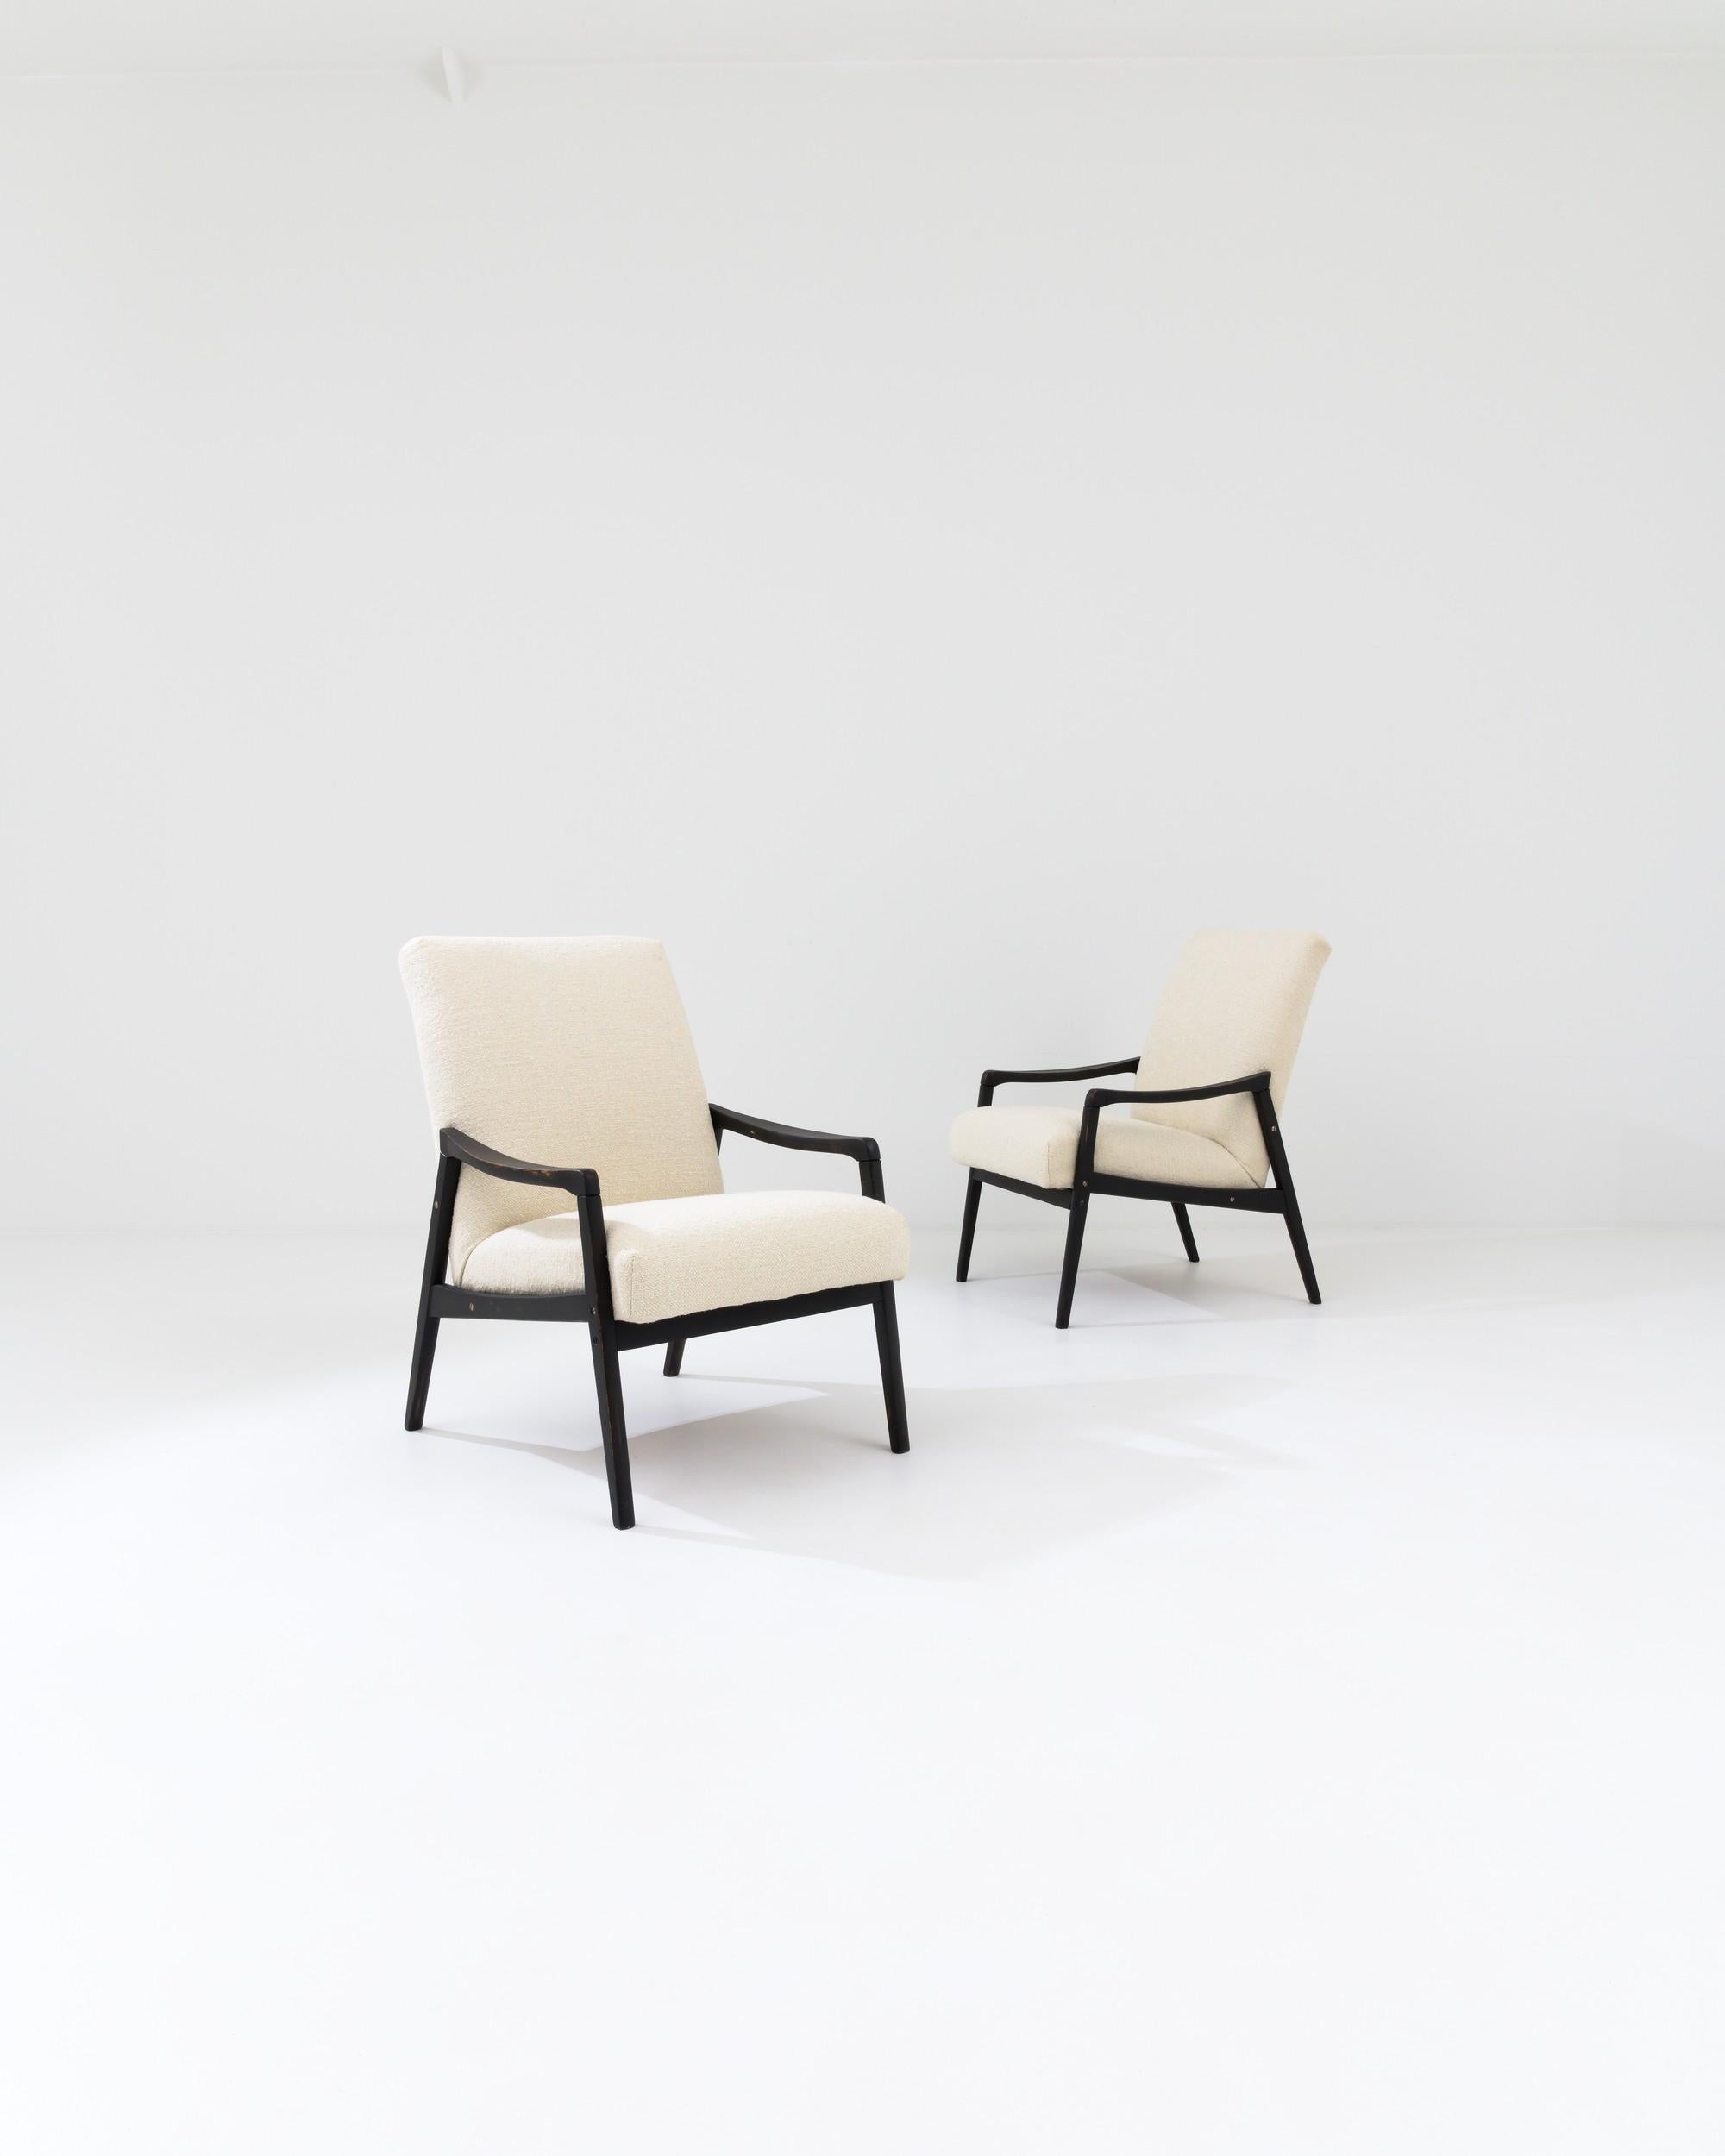 Designed in 1950s Czechia, this pair of exquisite mid-century modern armchairs flaunts sleek silhouettes shaped by the captivating contours of their black-patinated wooden bases with splayed legs and gently curved arms. The white bouclé upholstery